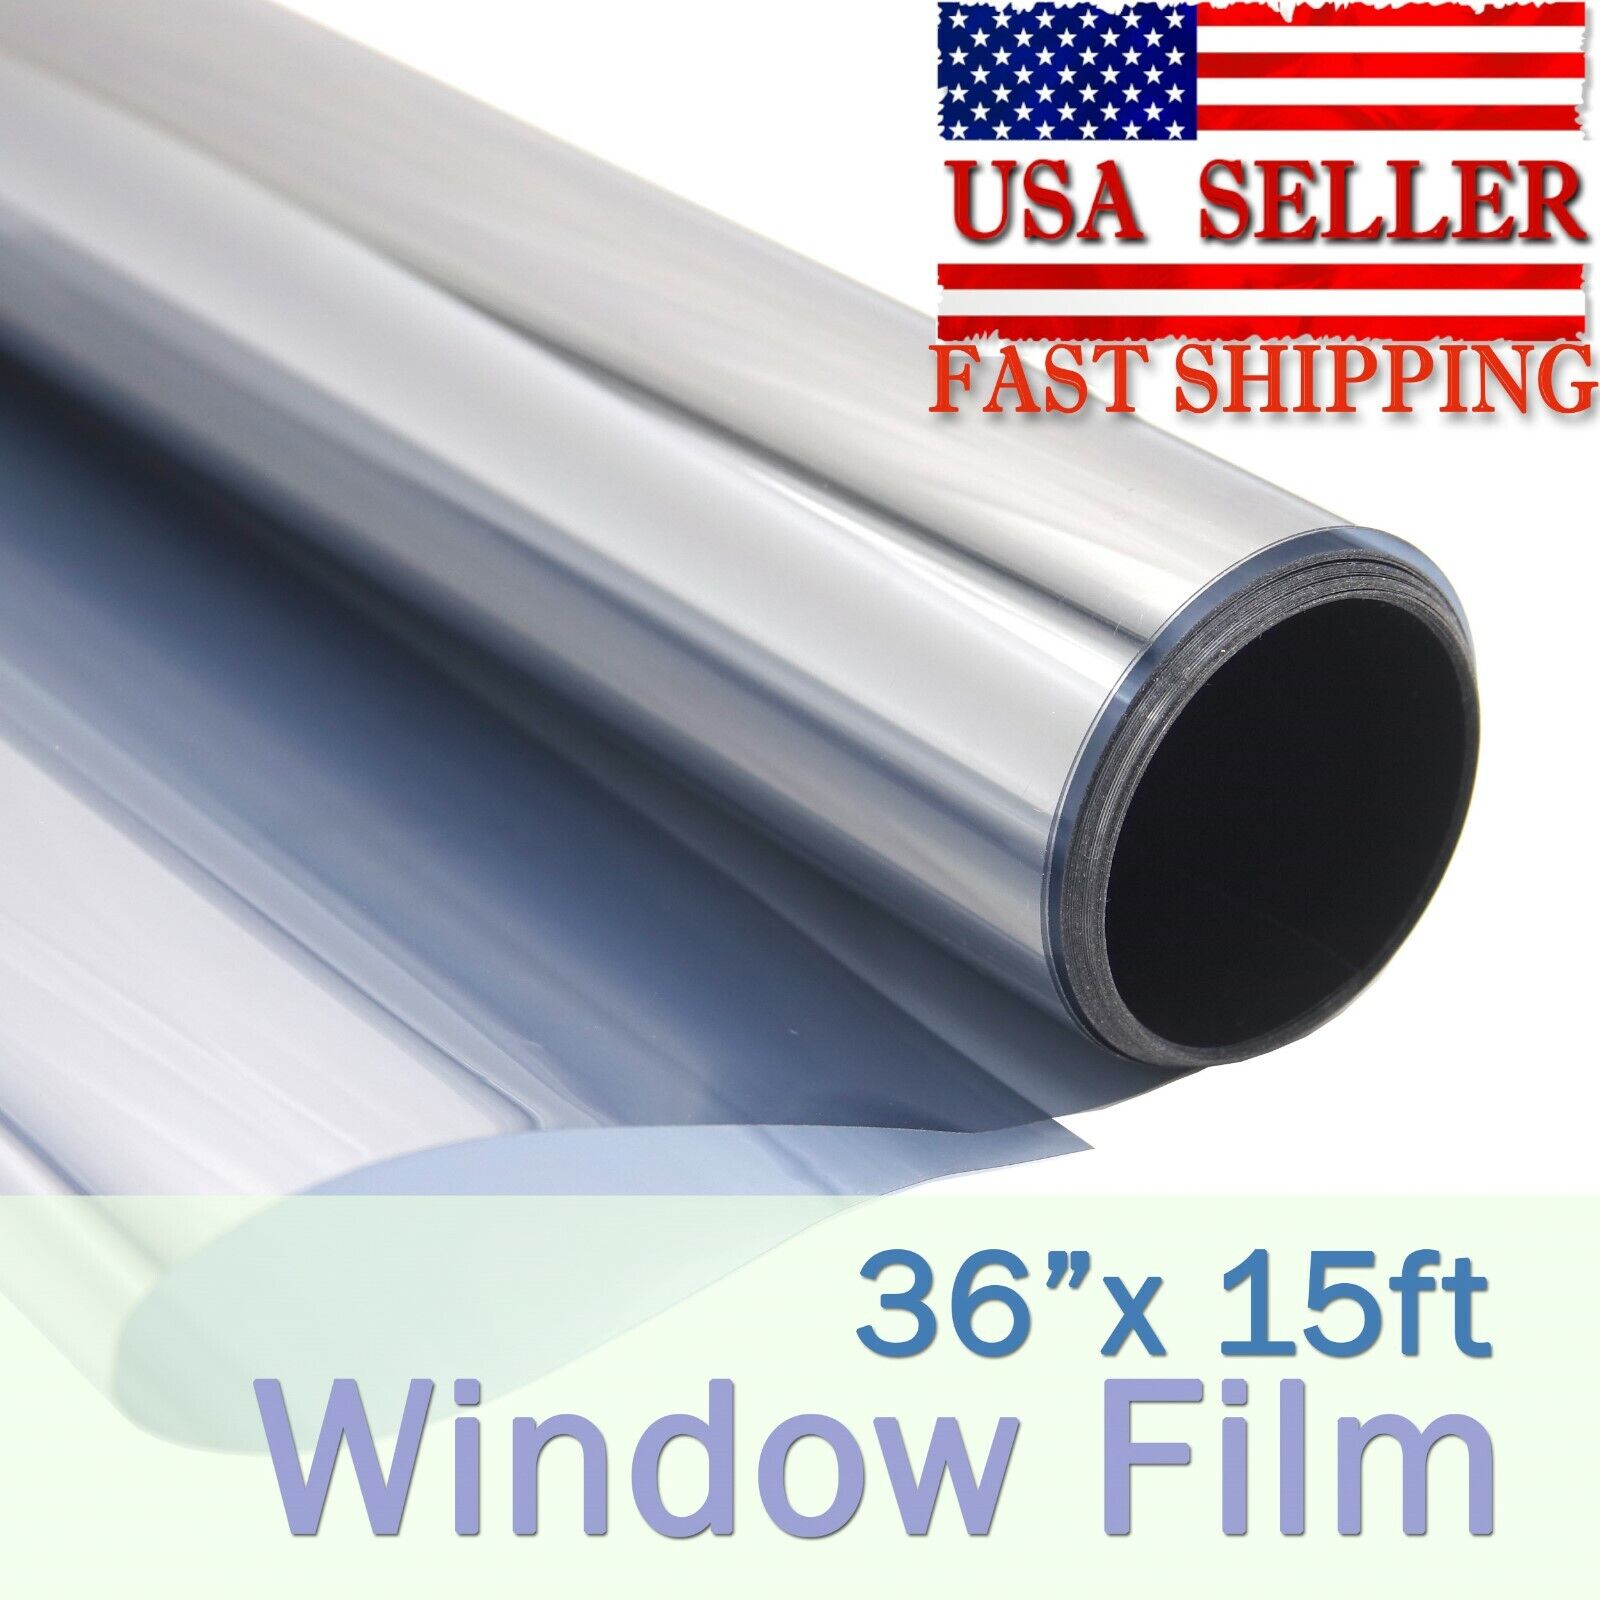 36"x15ft 20% Window Film Privacy Reflective One Way Mirror Tint Home Office UV AtoZ